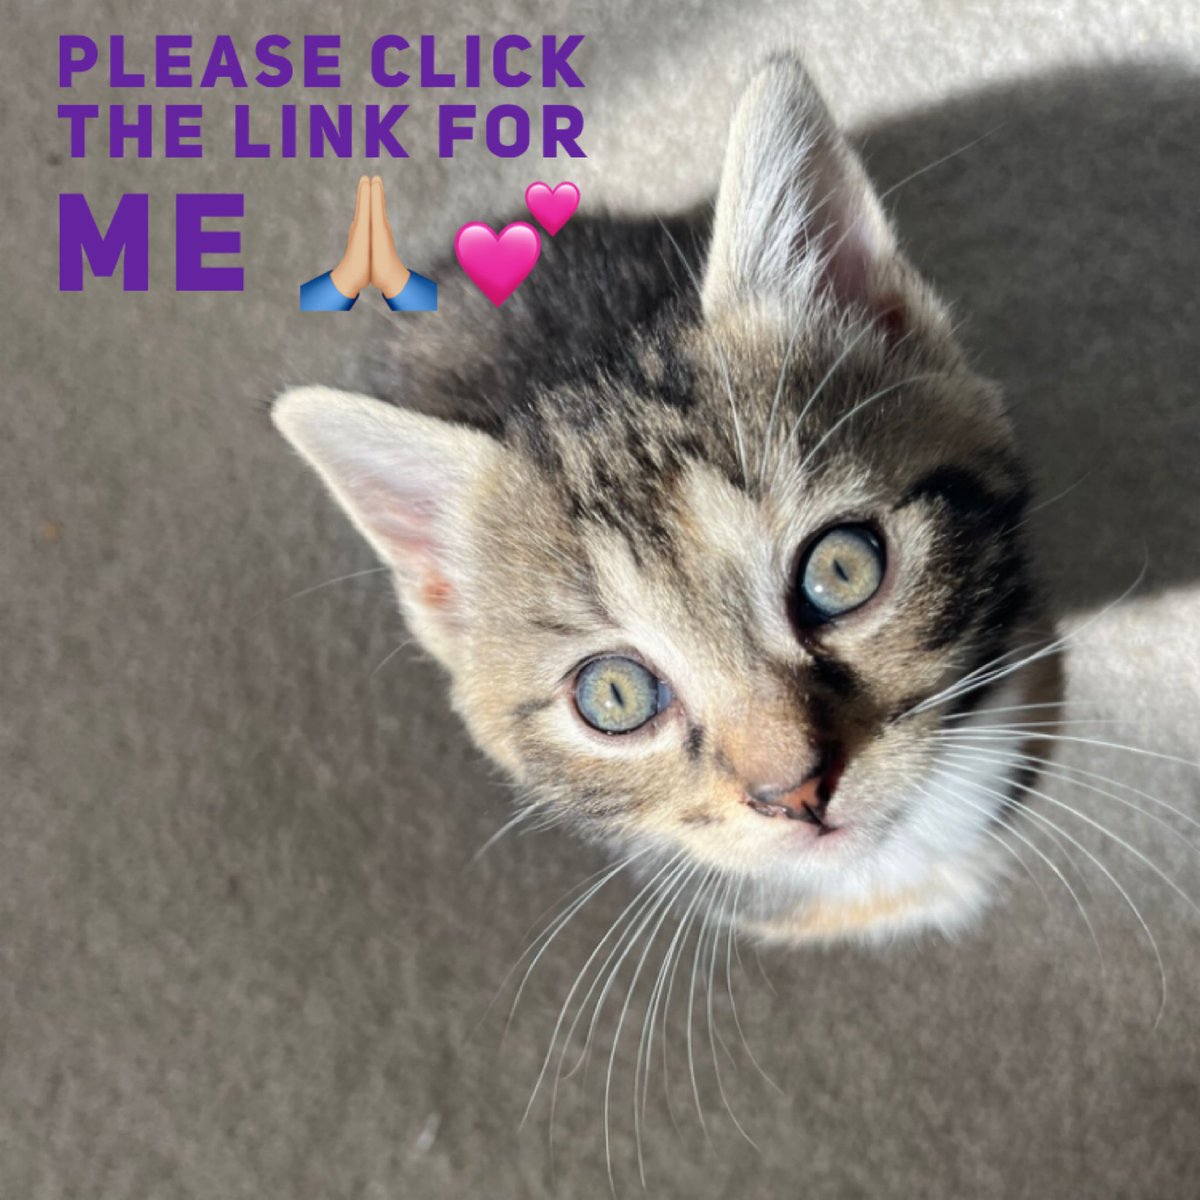 🚨🚨 PLEASE CLICK THE LINK 🙏🏼 Even if you have clicked before you can click again. yummypets.com/voice/pot/351 We have 10kilos to achieve and 9 days to achieve it 🫣🫣🫣 Thank you #catlovers #rescuecats #animalrescue #pleasehelp #catcharity #cutecat #cutecats